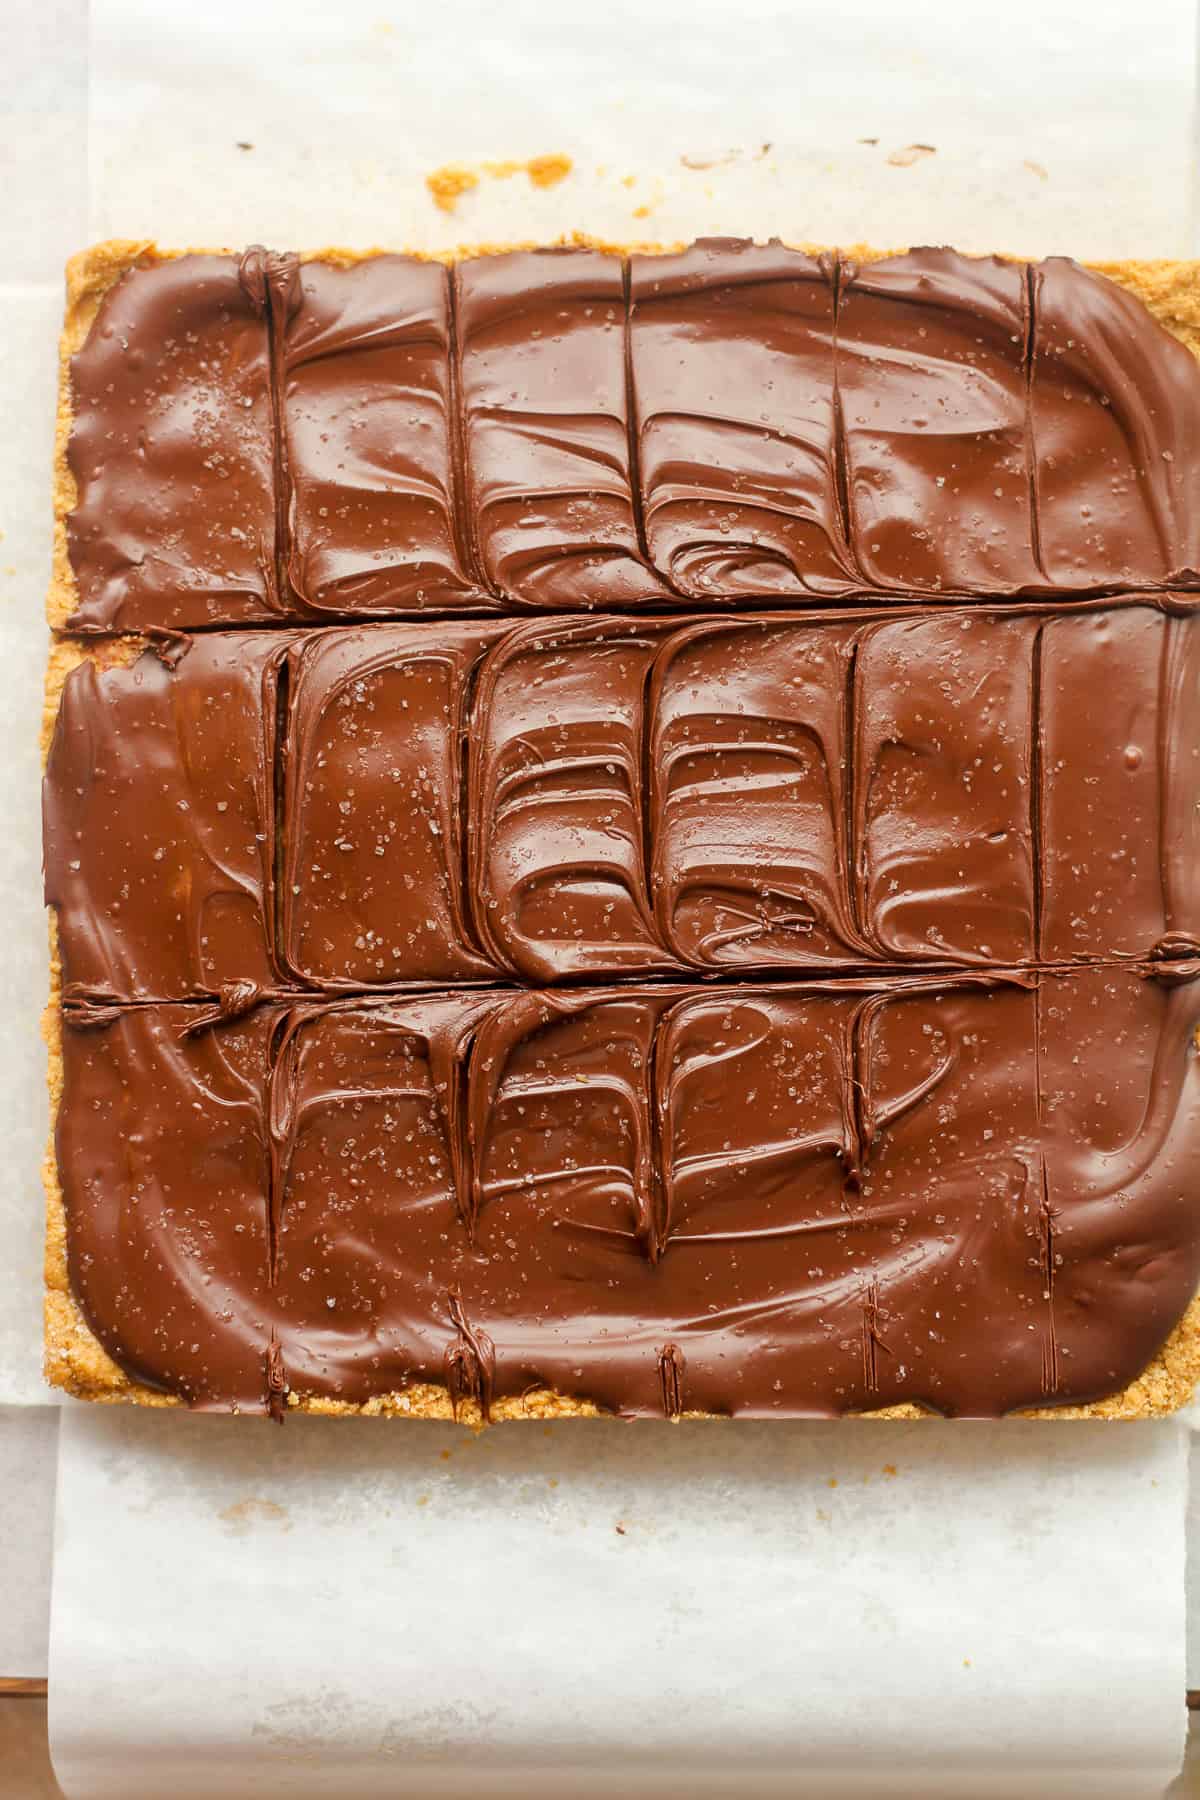 A large square of peanut butter bars with some creamy chocolate on top.